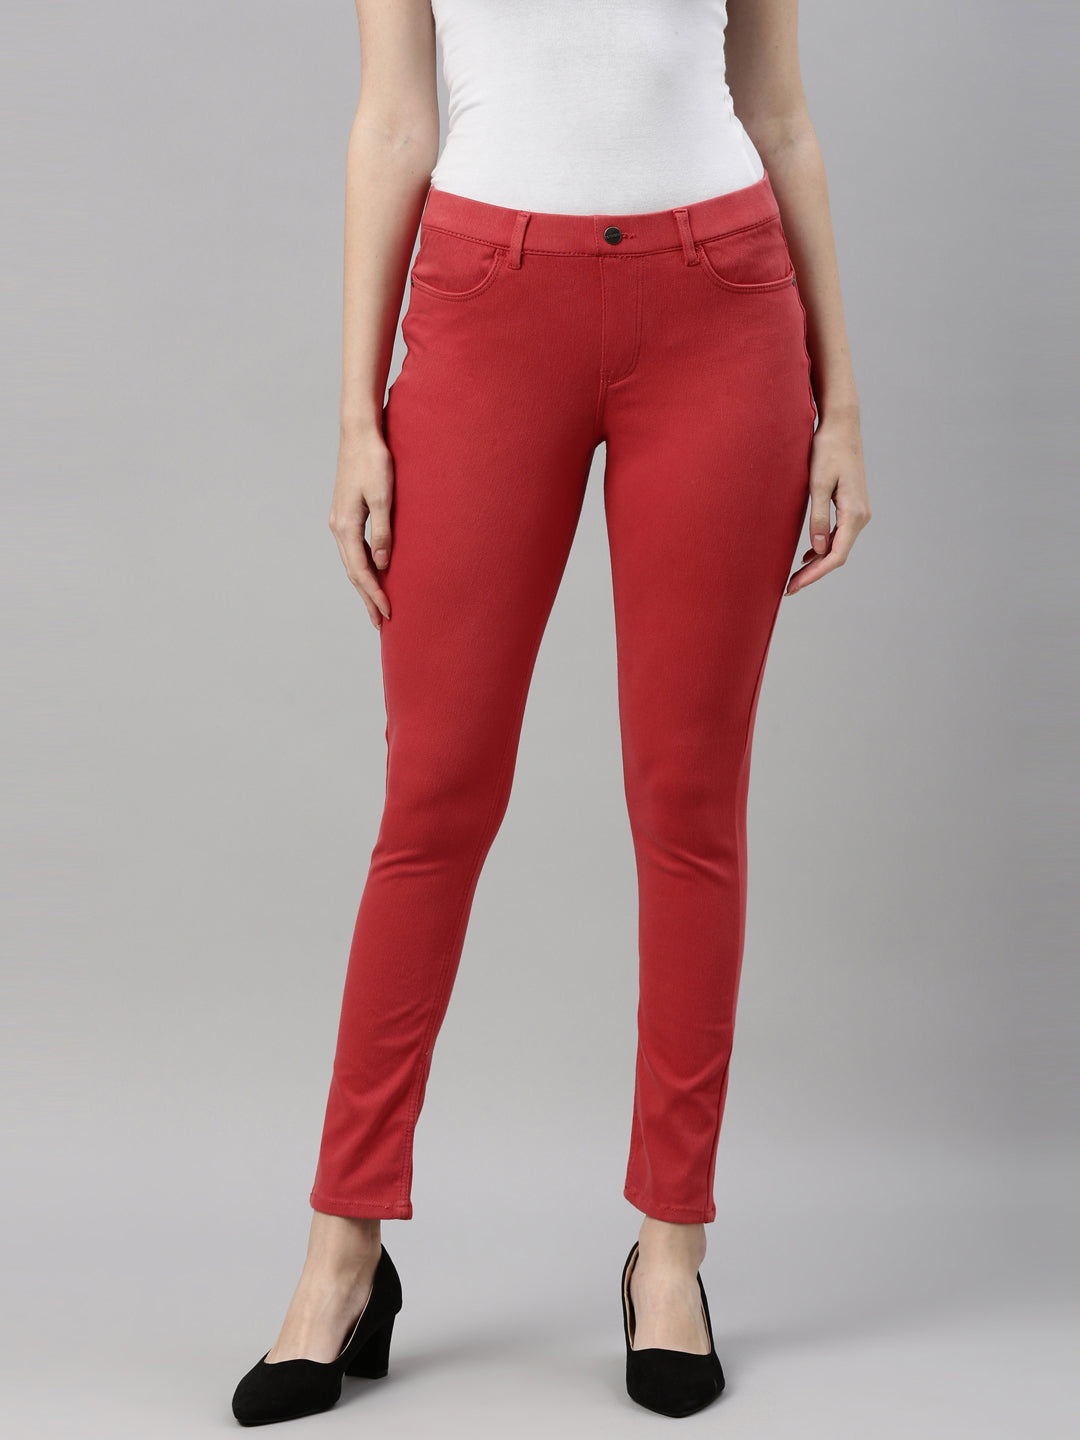 Mid Rise Jegging (Medium 7/9, Red) at  Women's Clothing